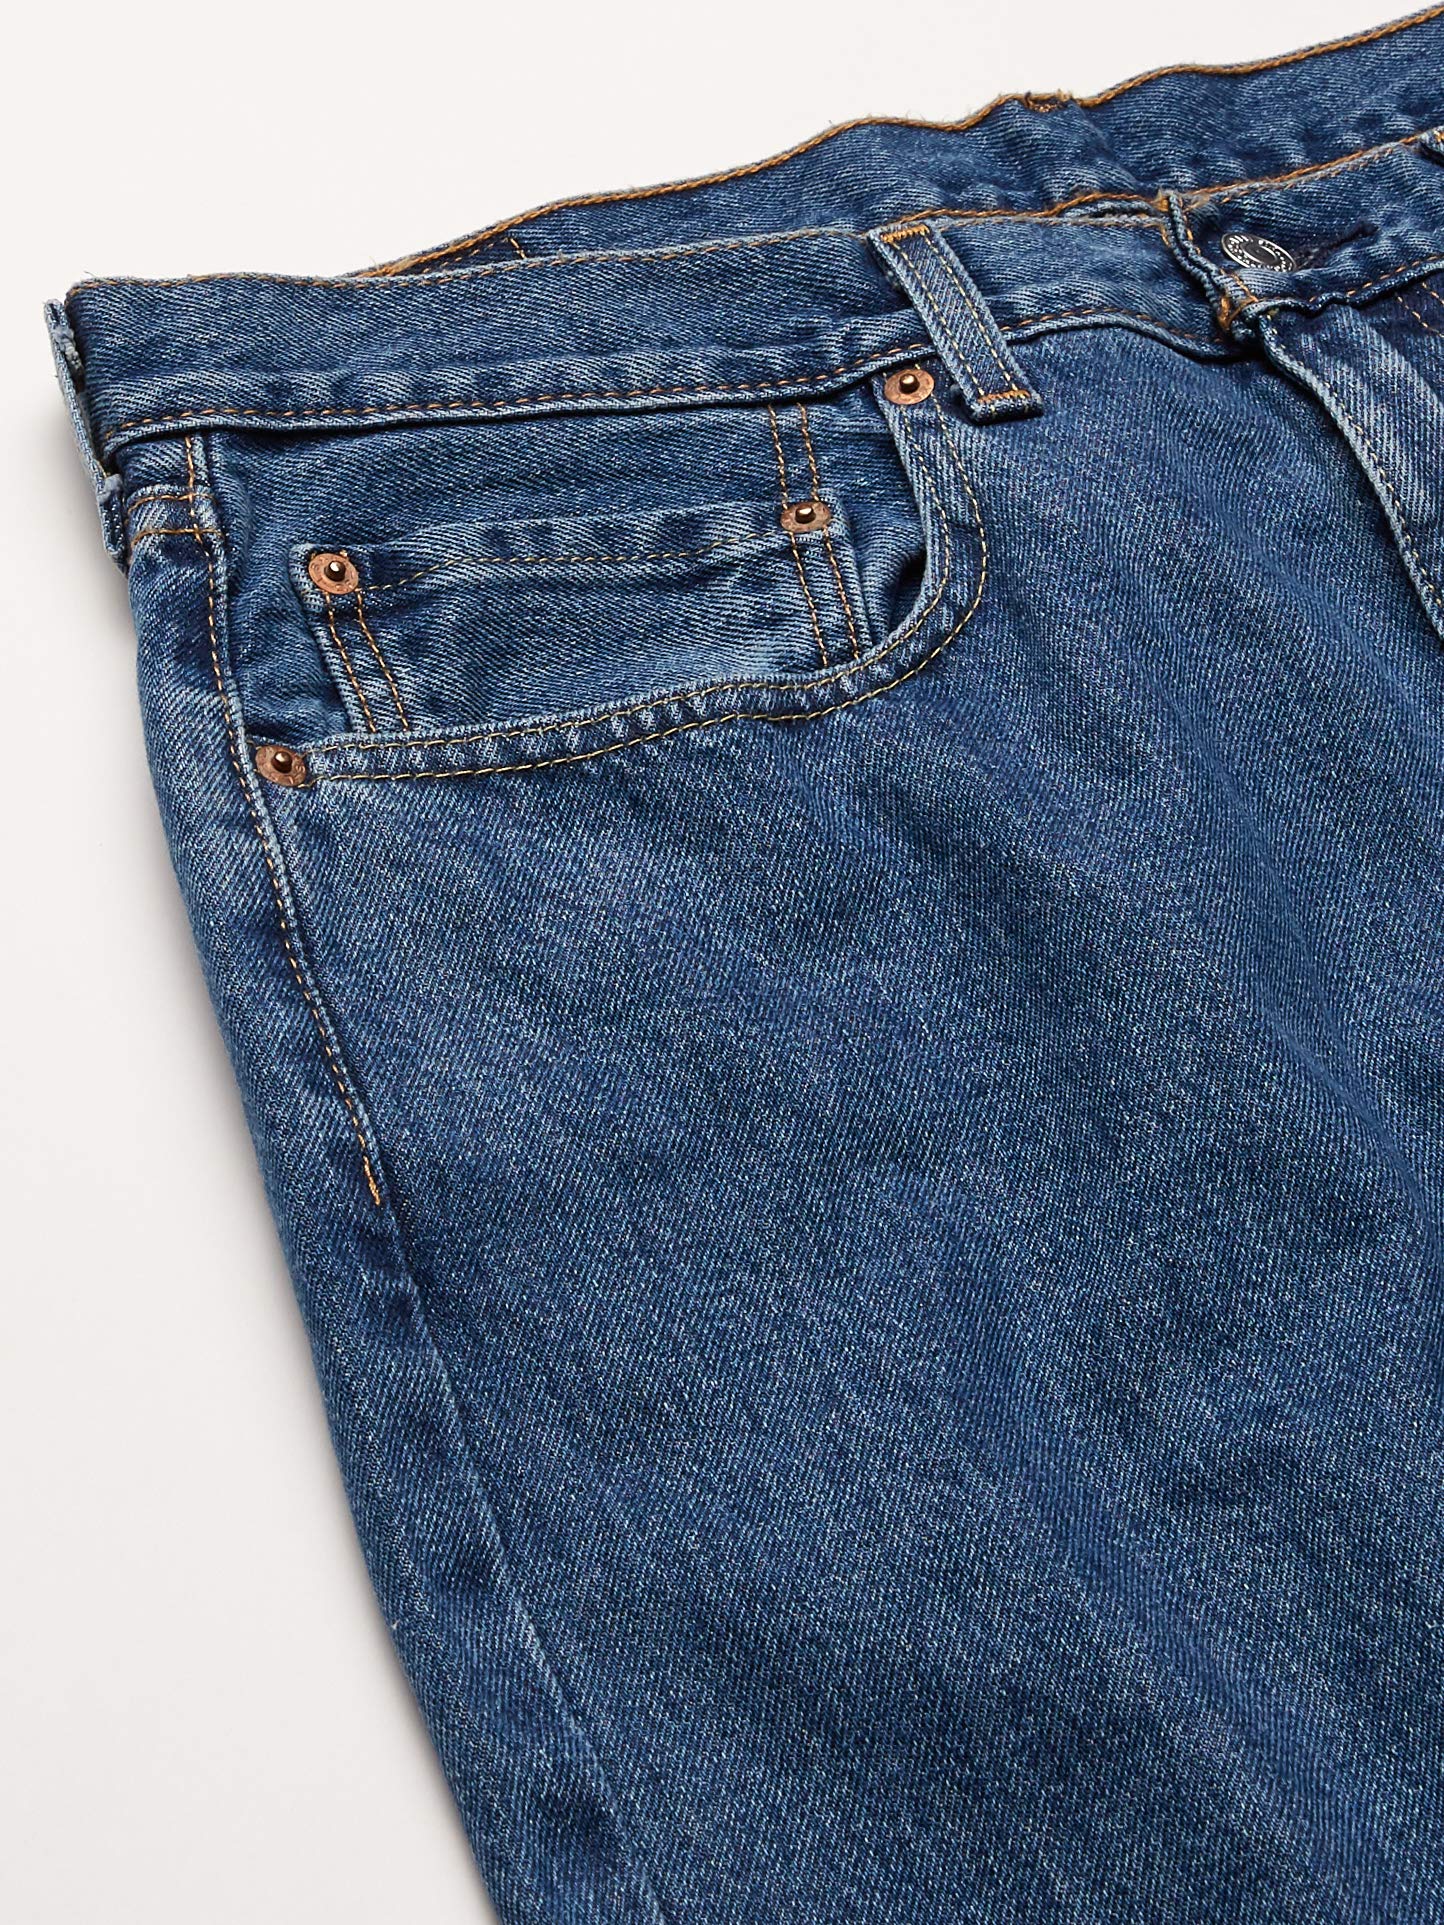 Levi's Men's 550 Relaxed Fit Jeans (Also Available in Big & Tall), Medium Stonewash, 50W x 29L